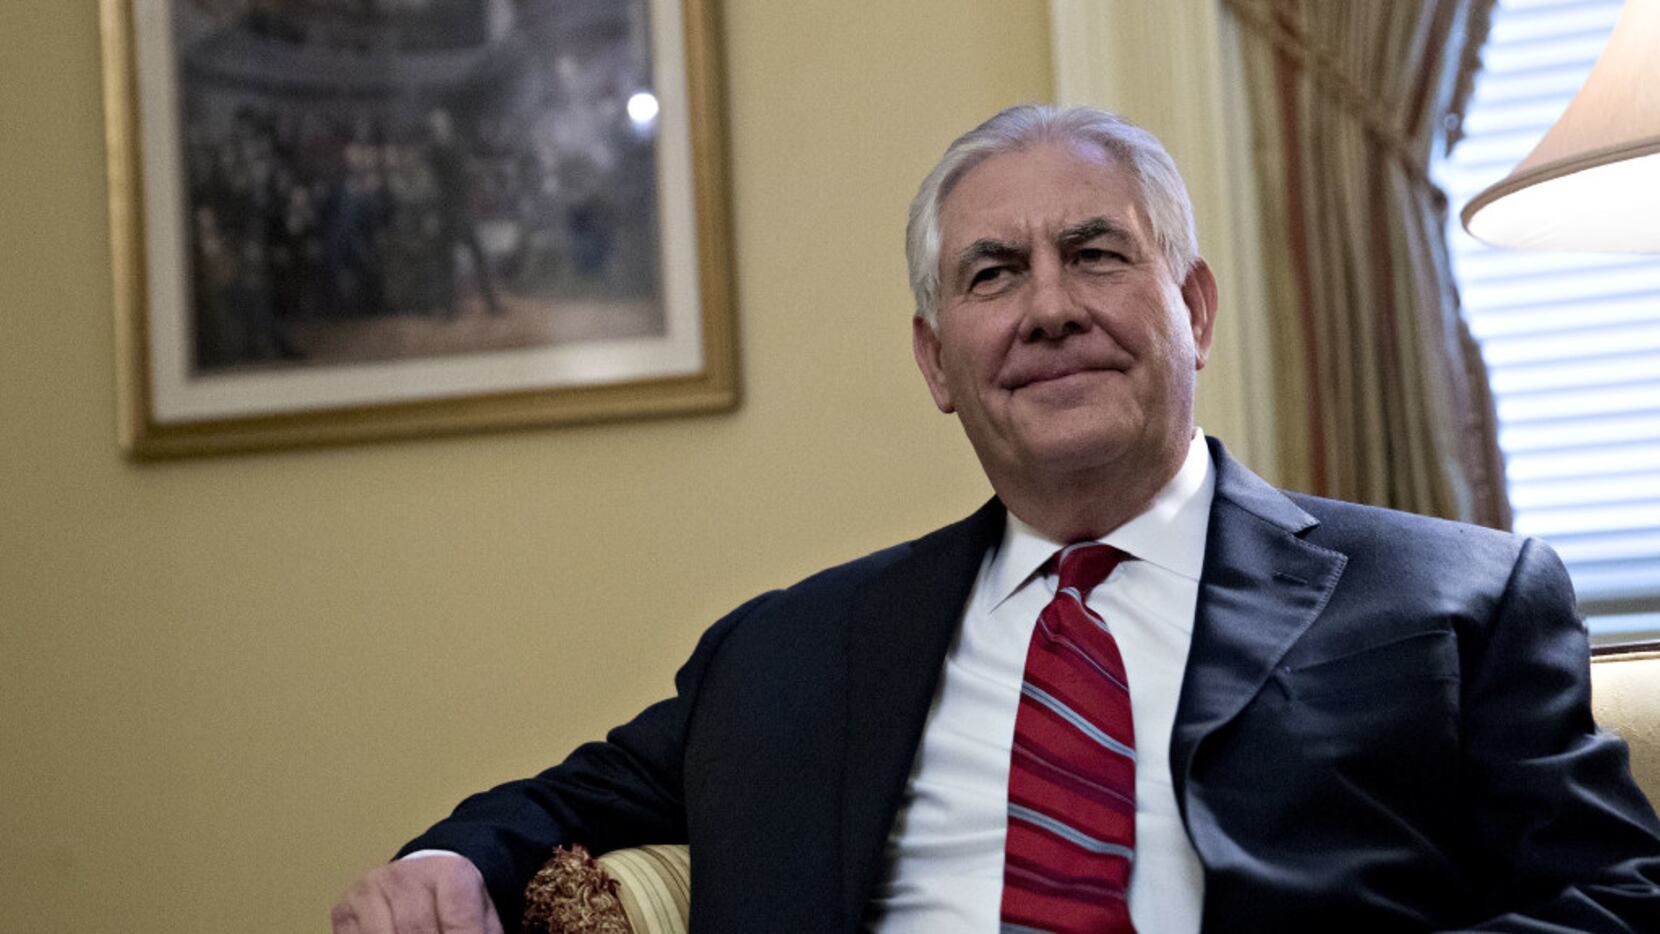 Rex Tillerson, former chief executive officer of Exxon Mobil Corp., met Wednesday with...